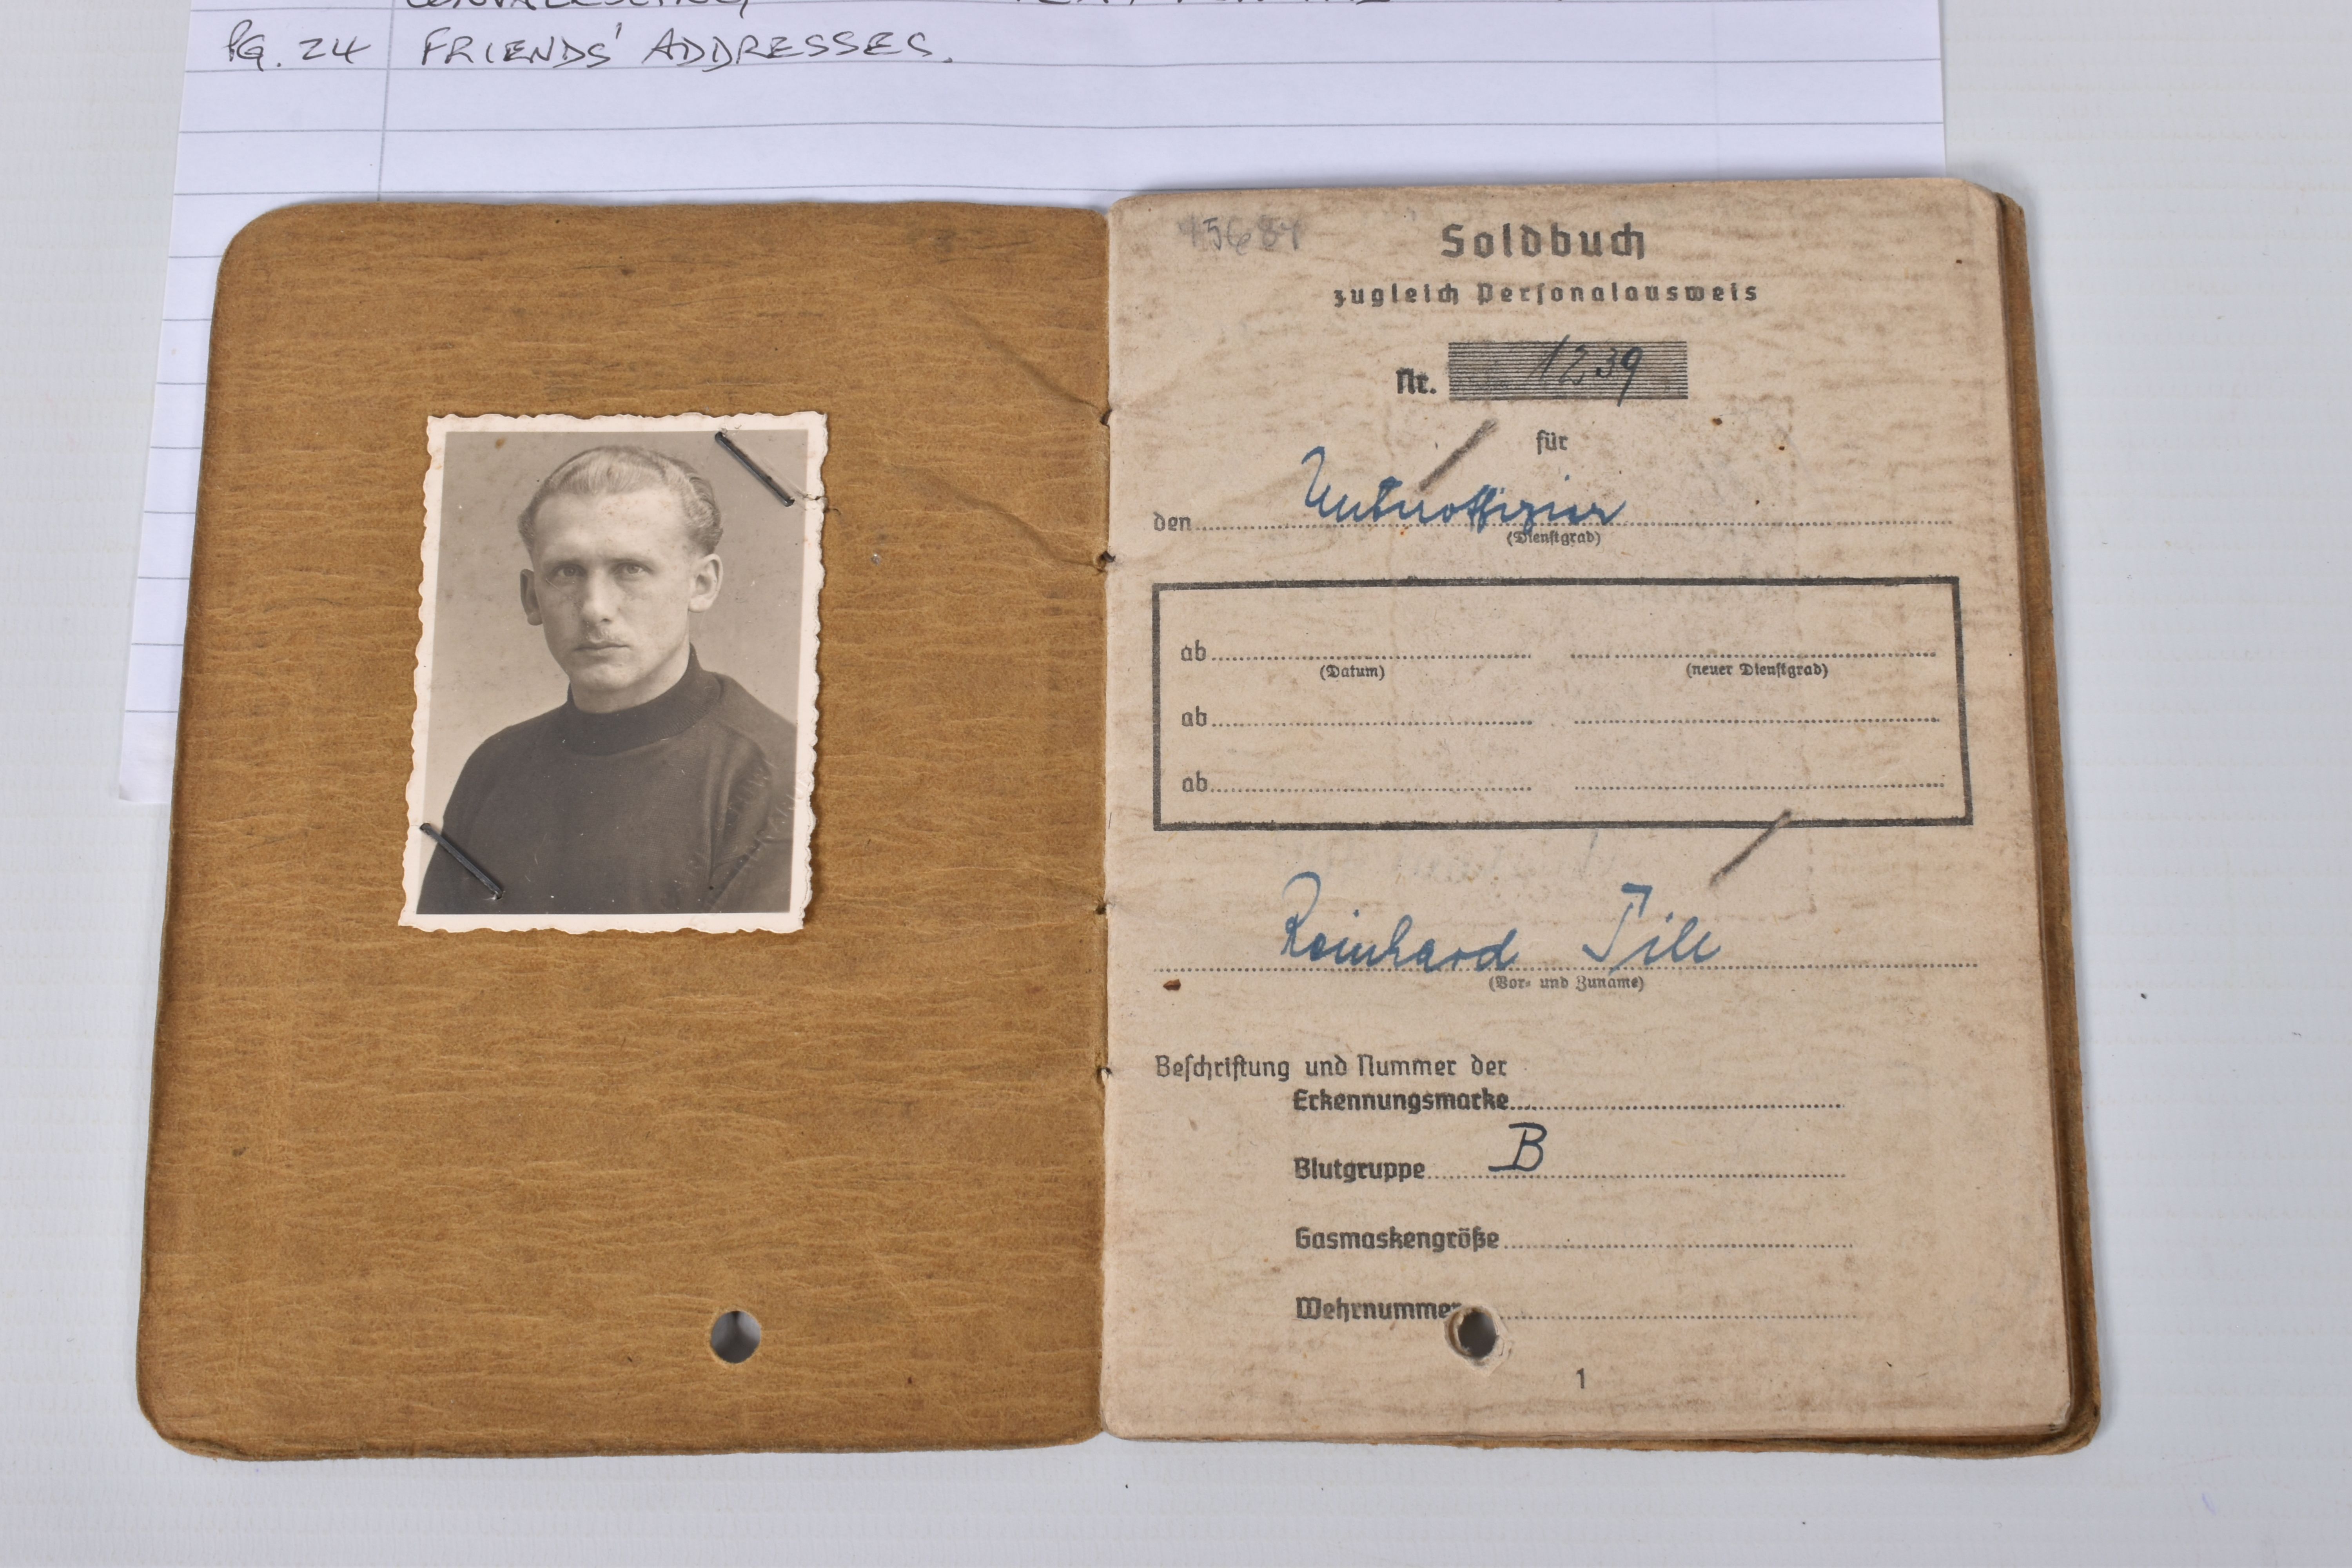 WWII SOLDBUCH USED AS POST-WAR ID DOCUMENT FOR REINHARD TILL, DOB 03/11/1916, place: Vienna, - Image 2 of 4